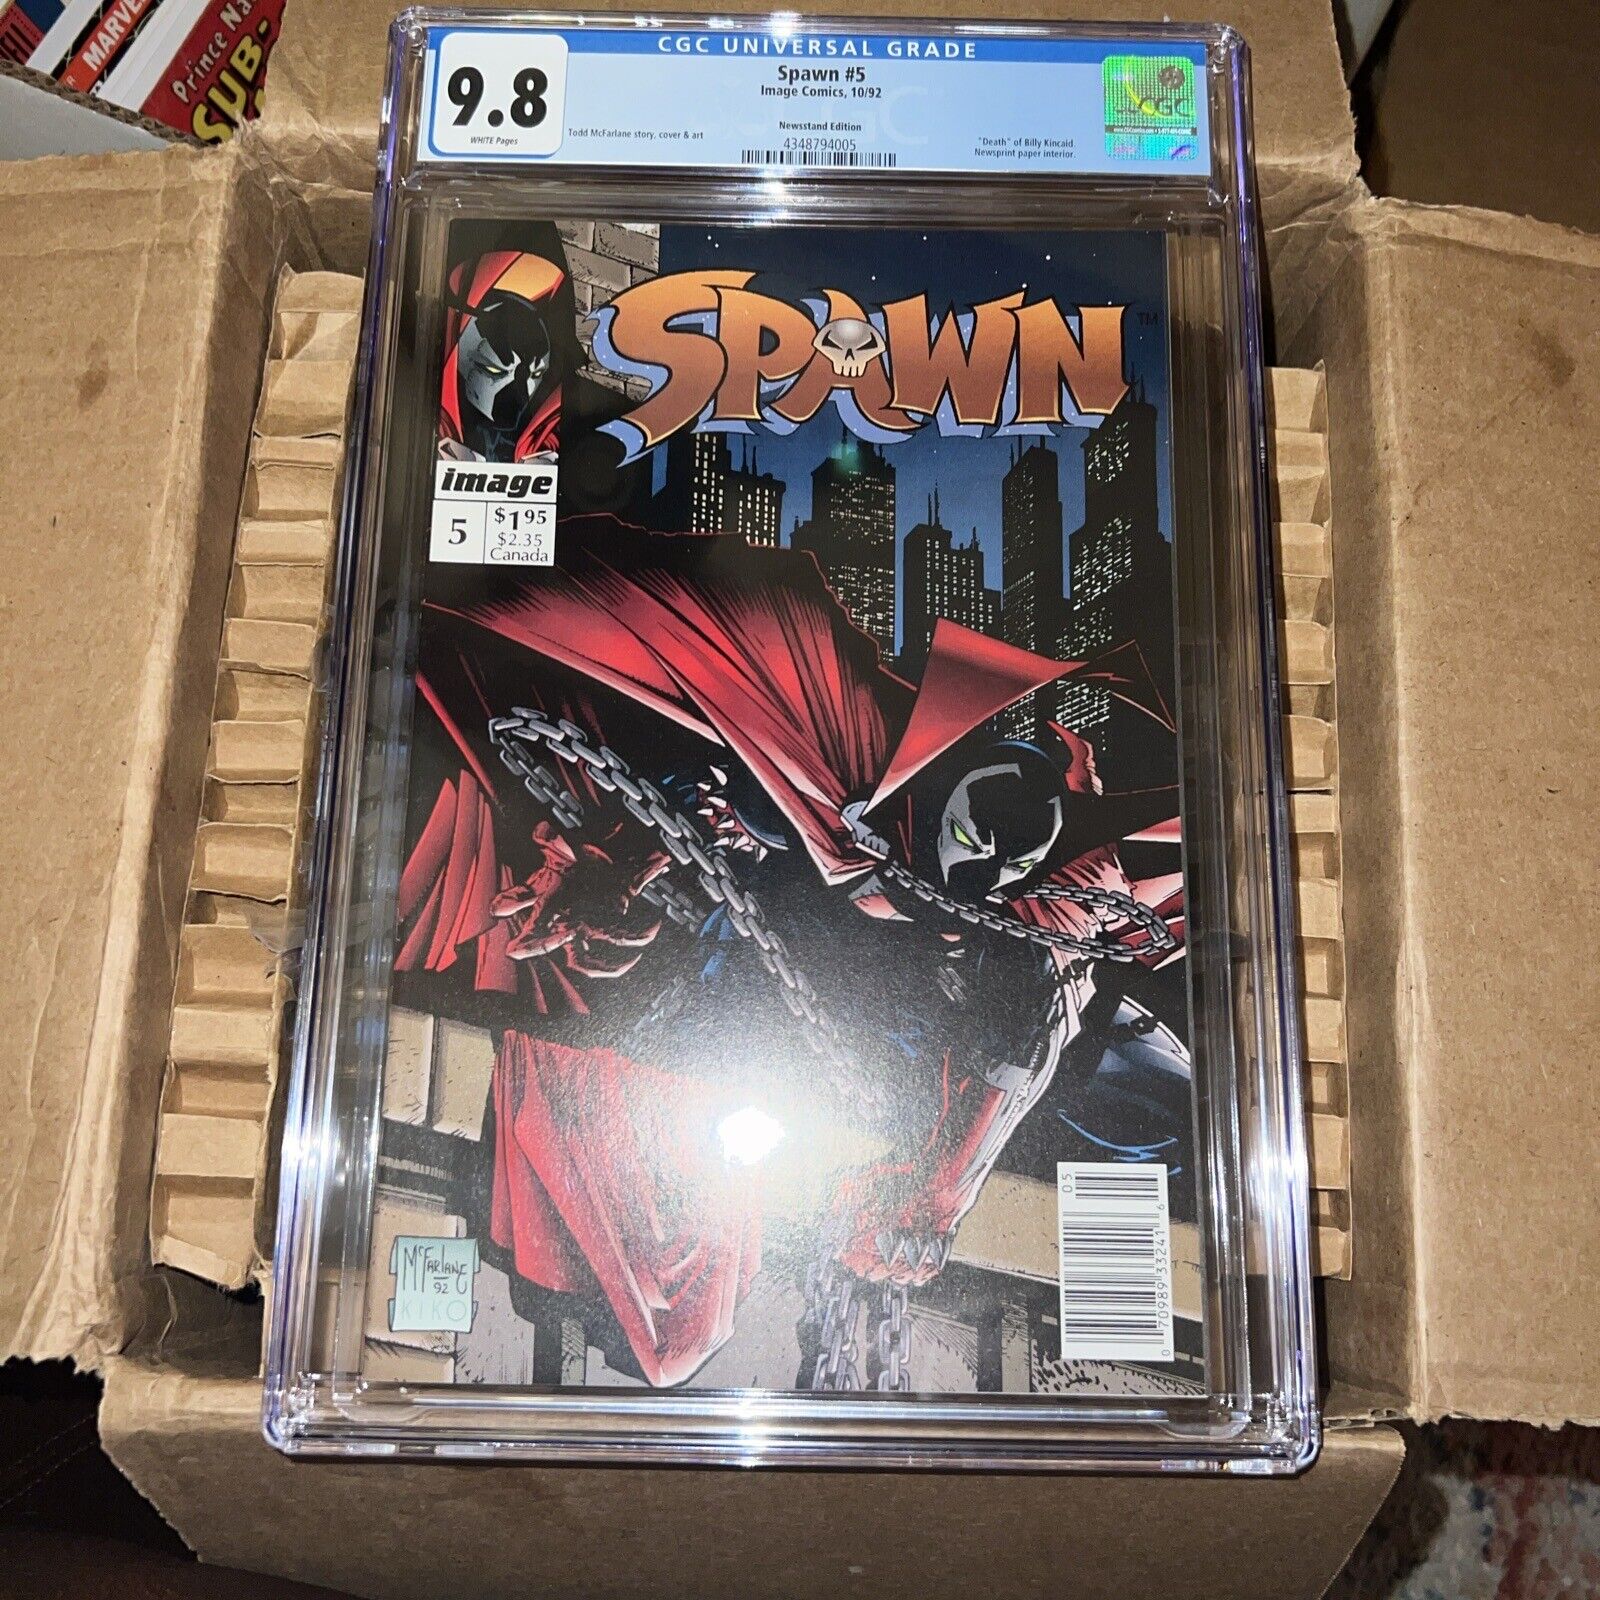 Spawn 5 - RARE NEWSSTAND EDITION - Death Of Billy Kincaid 1992 - CGC Graded 9.8